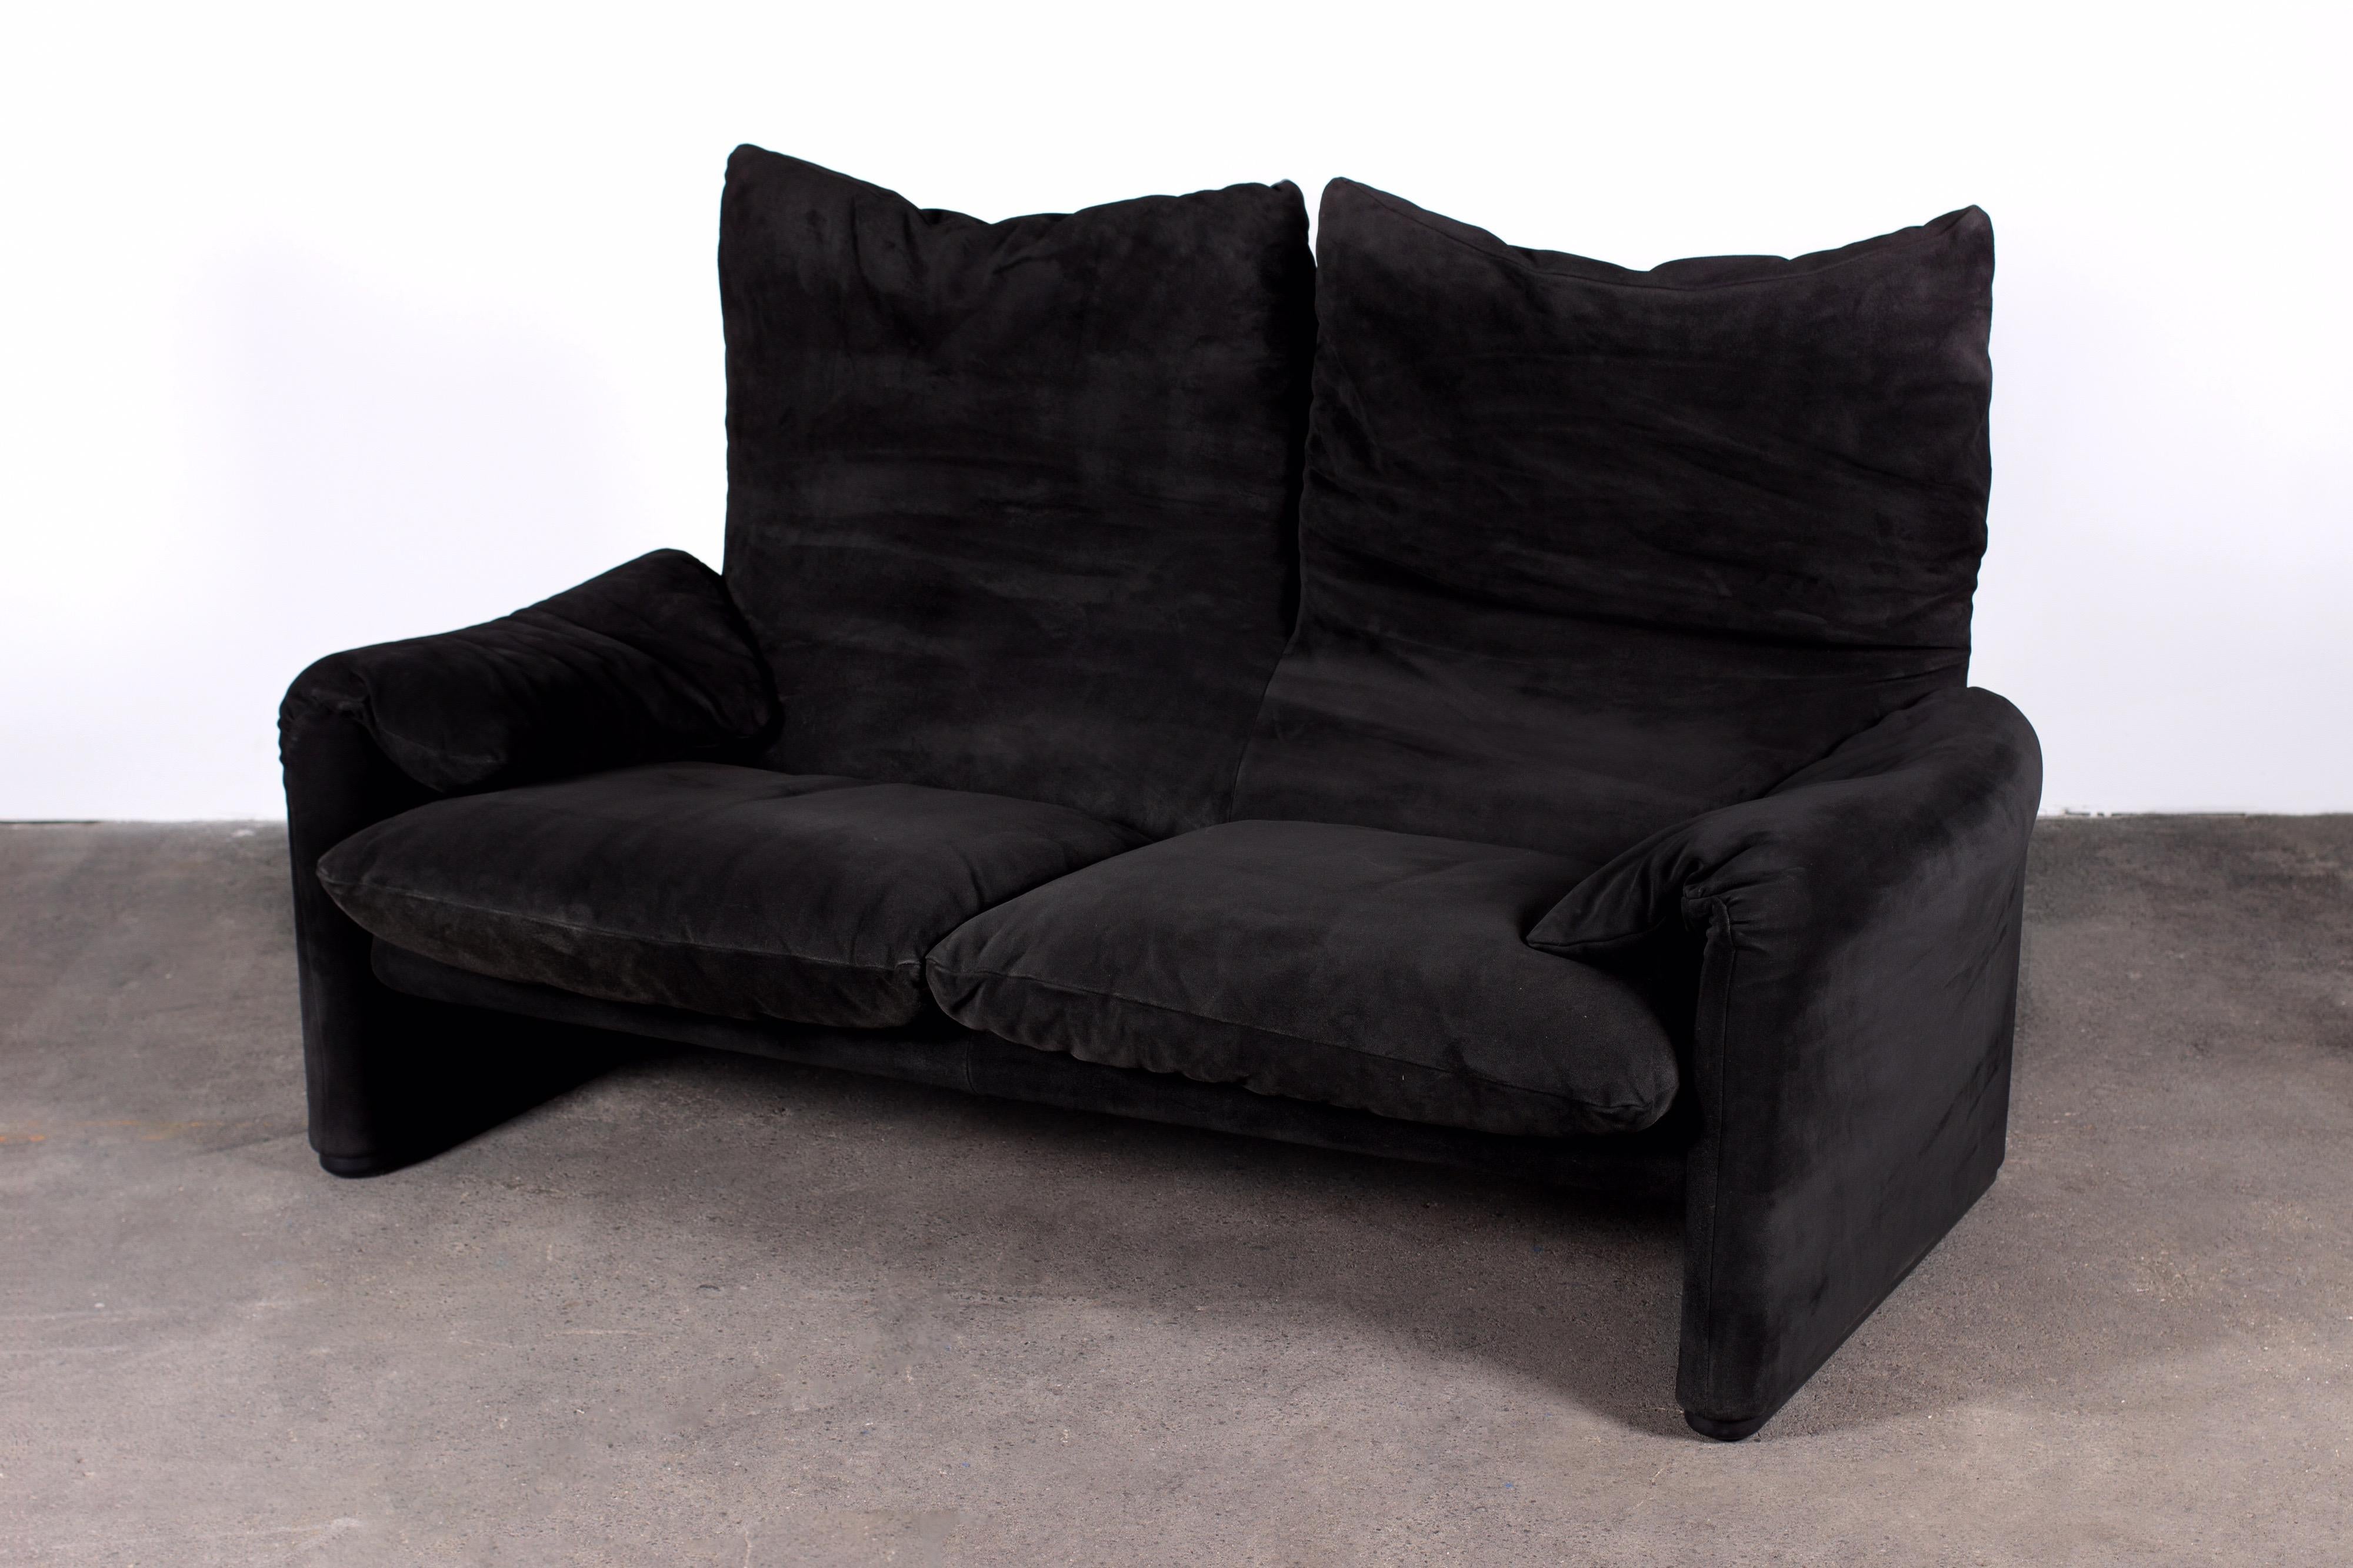 Pair of Black Suede 2-Seater Maralunga Sofas by Vico Magistretti for Cassina 8